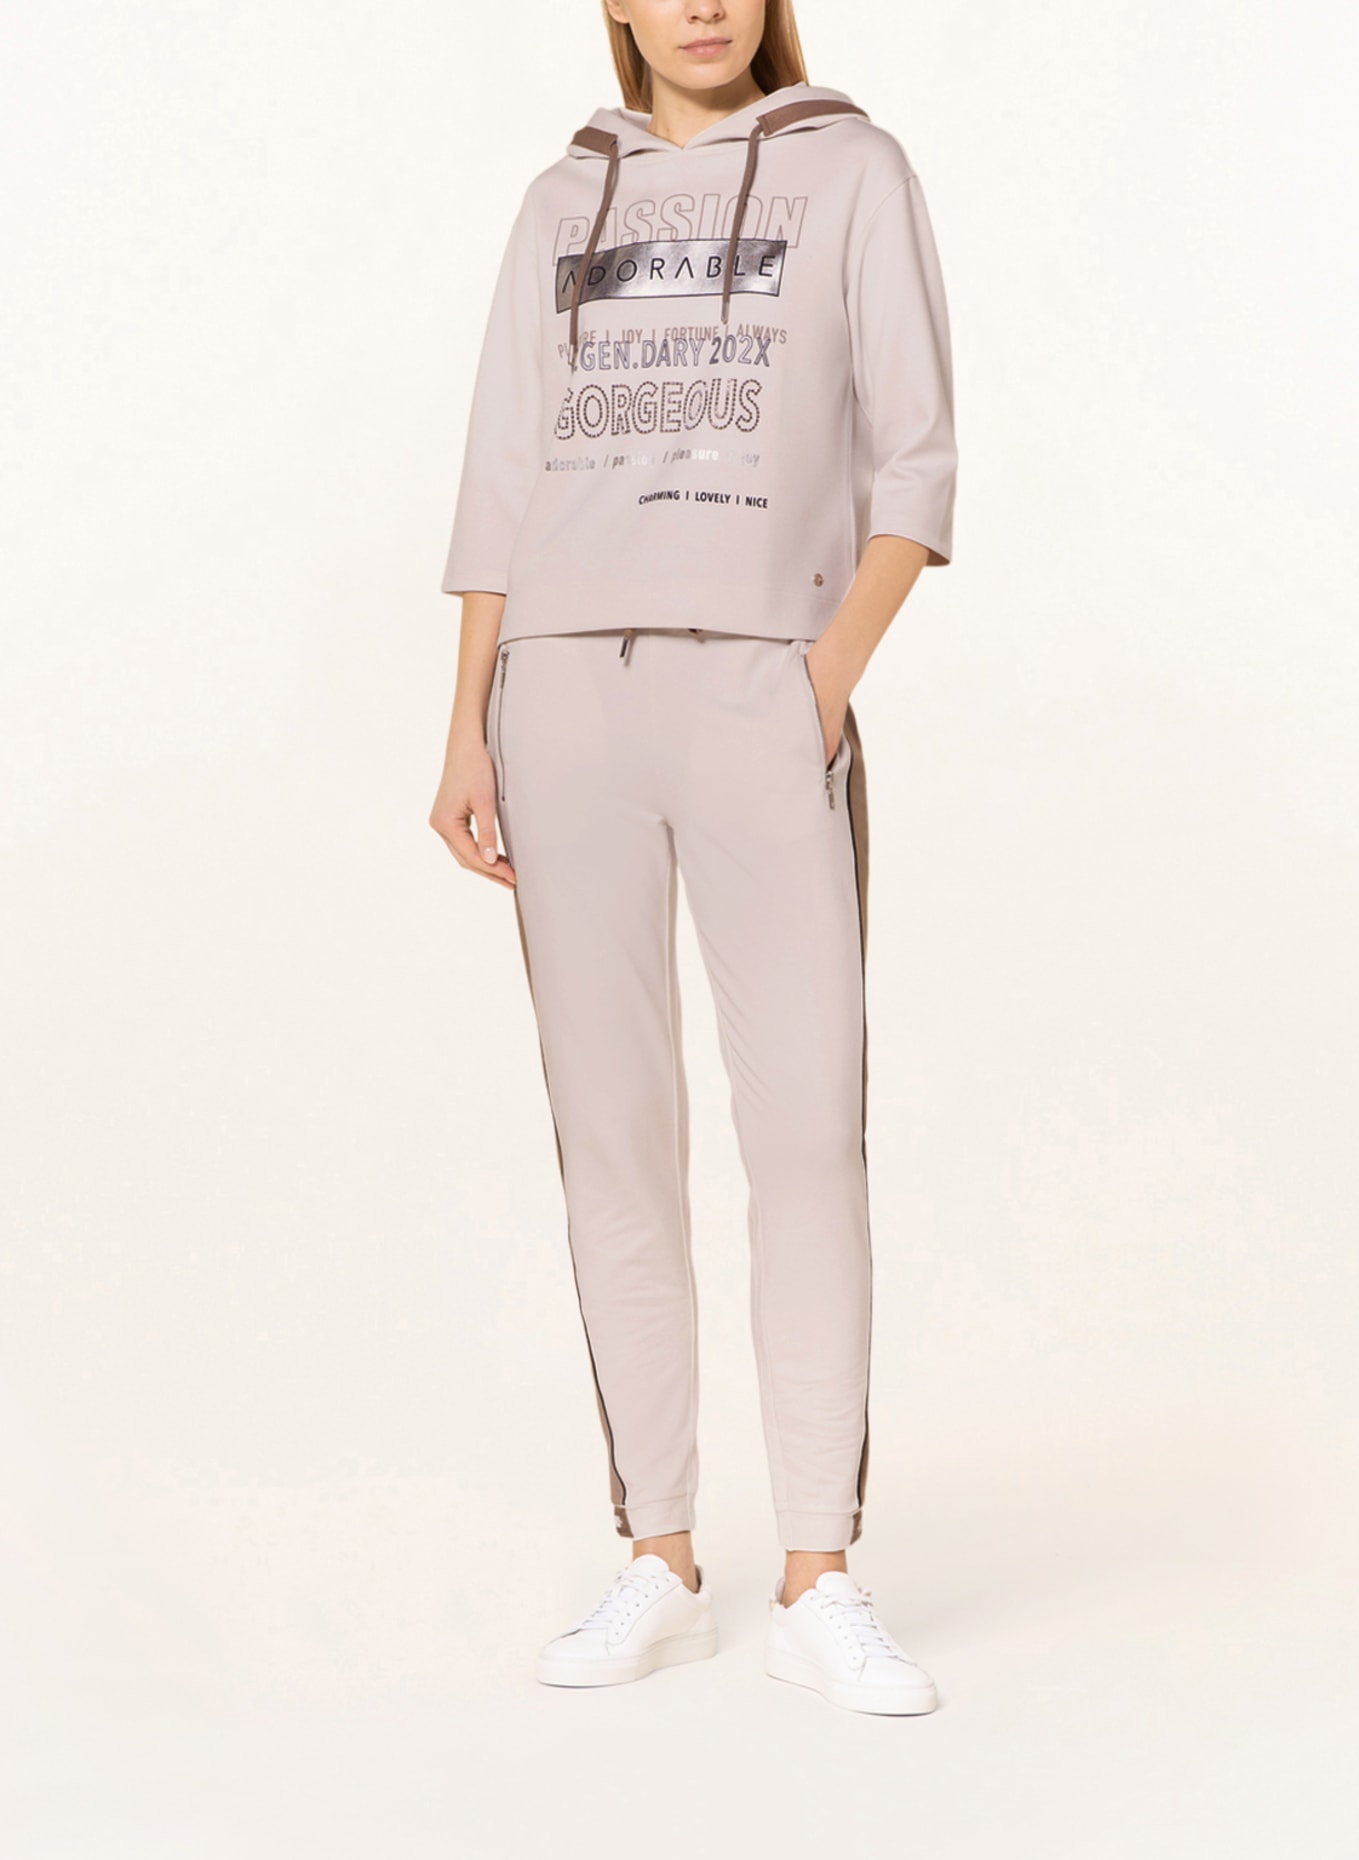 monari Pants in jogger style with tuxedo stripes, Color: CREAM/ BEIGE (Image 2)